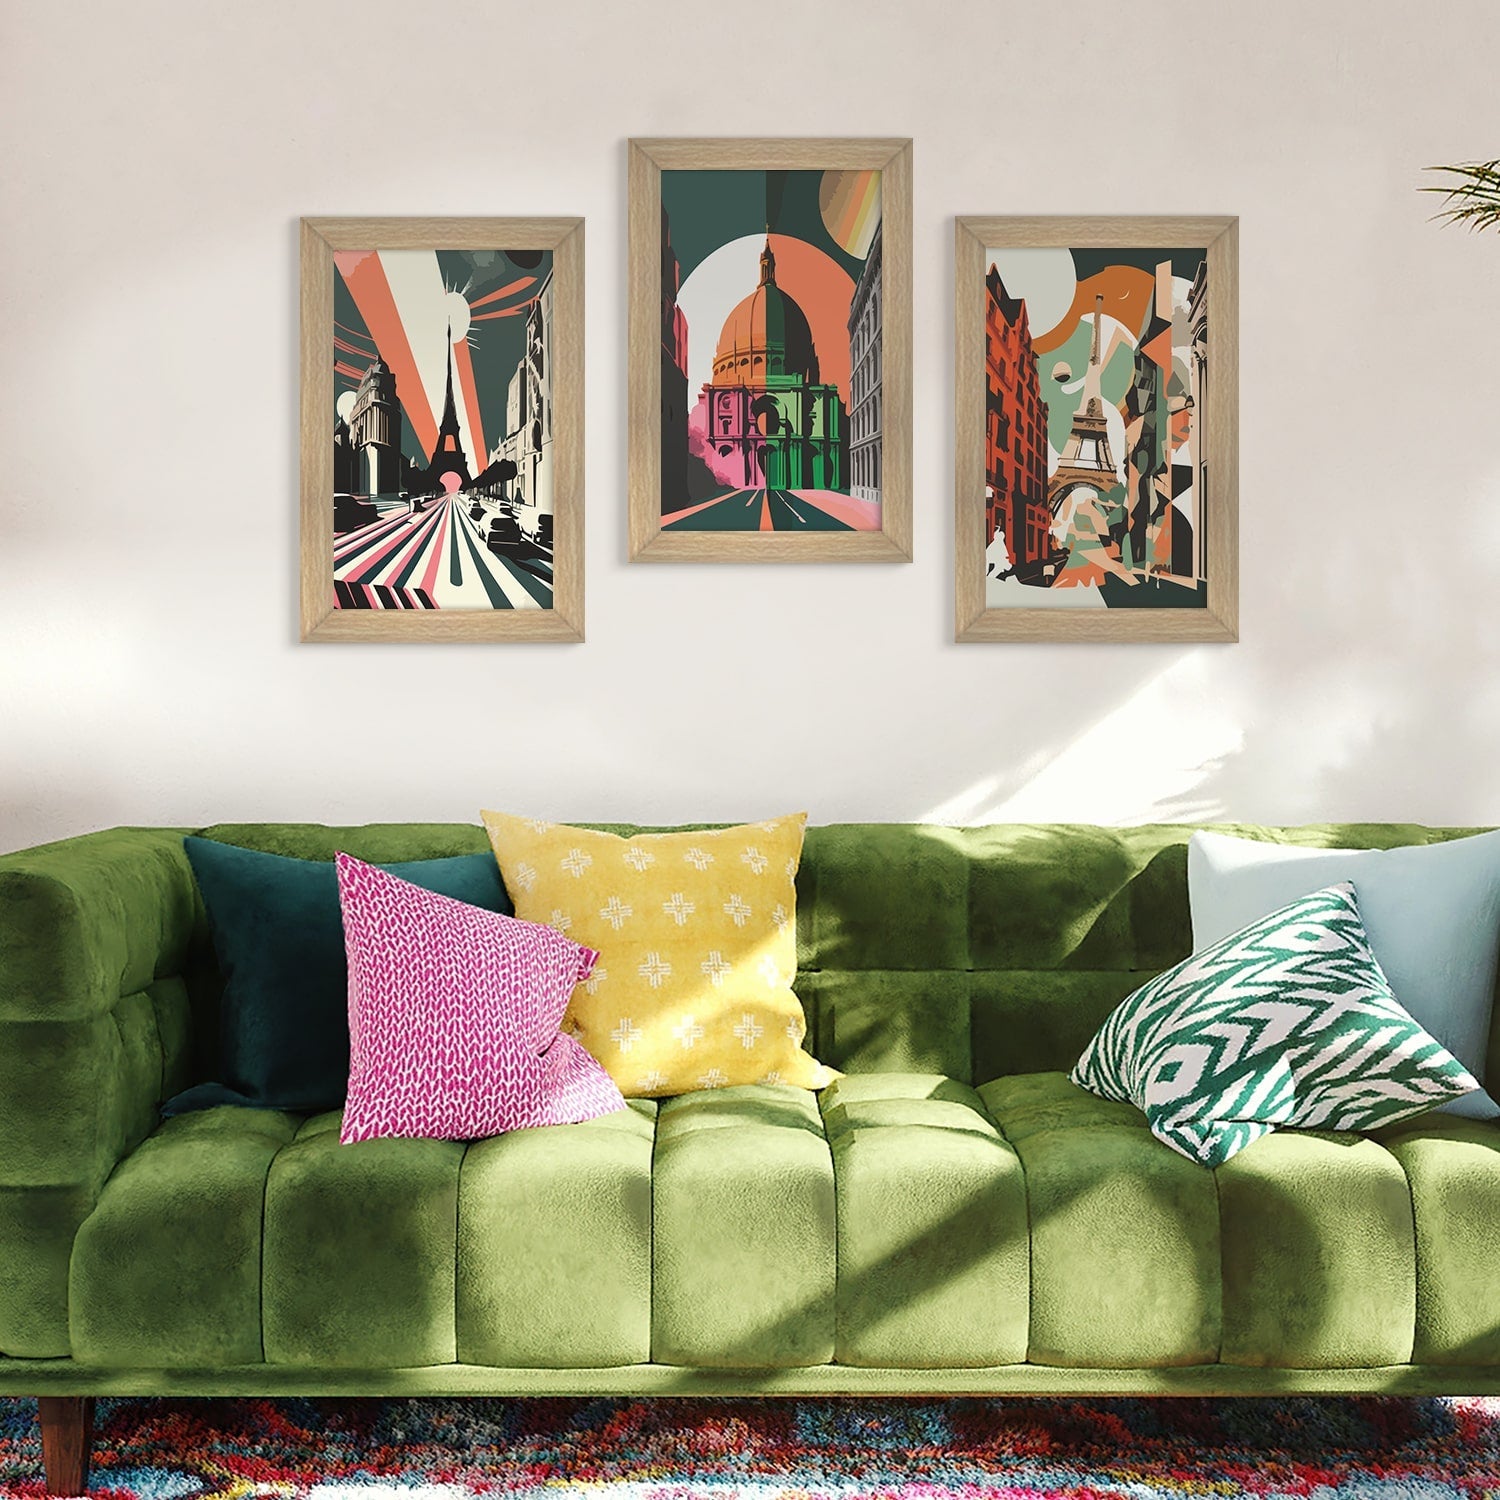 Paris, France Abstract Wall Art Painting For Home and Office